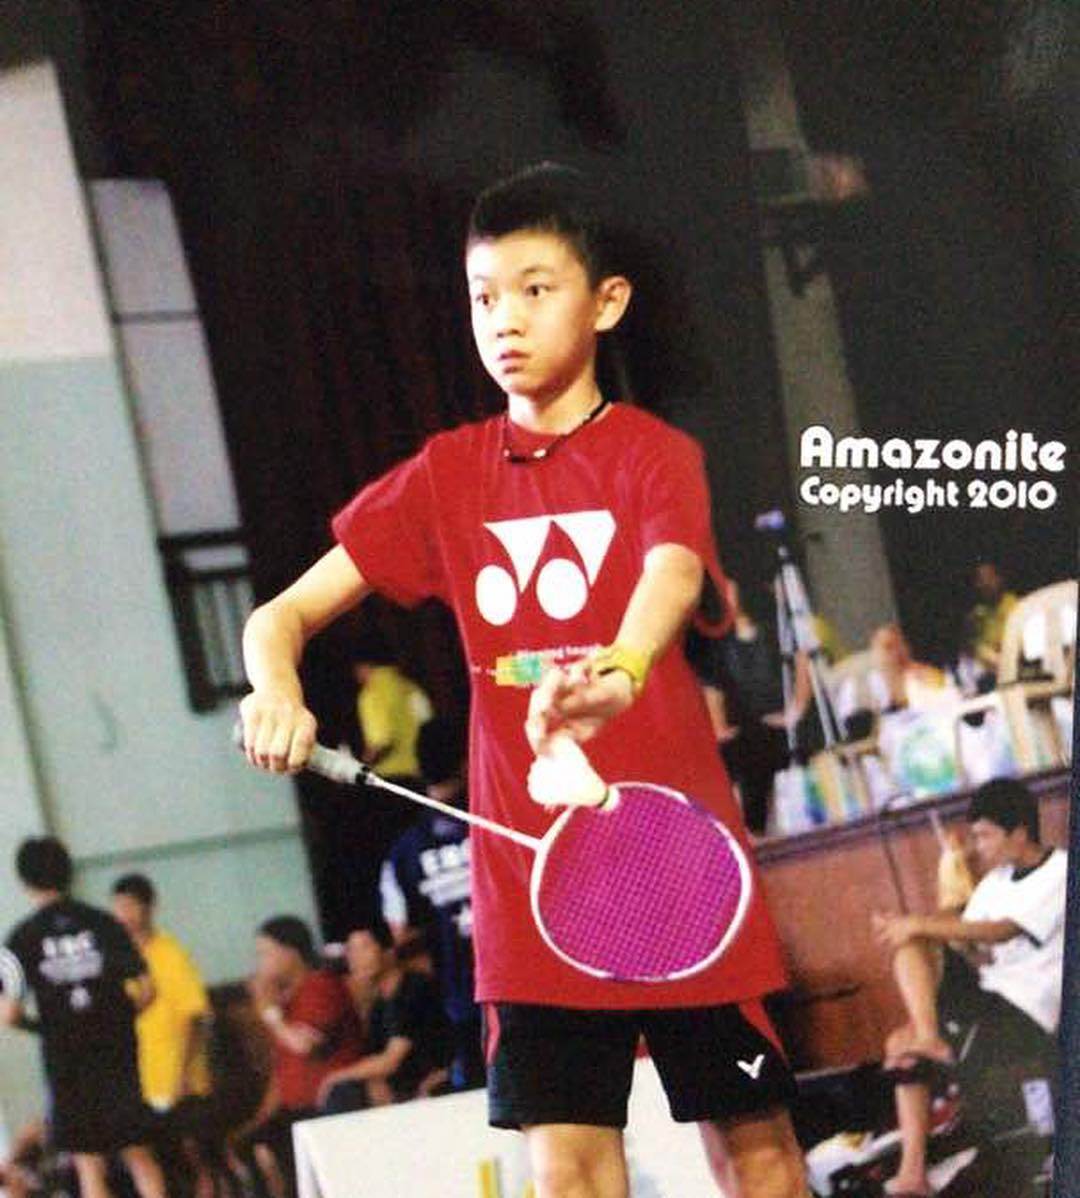 Facts About Lee Zii Jia, Malaysian badminton player - young 